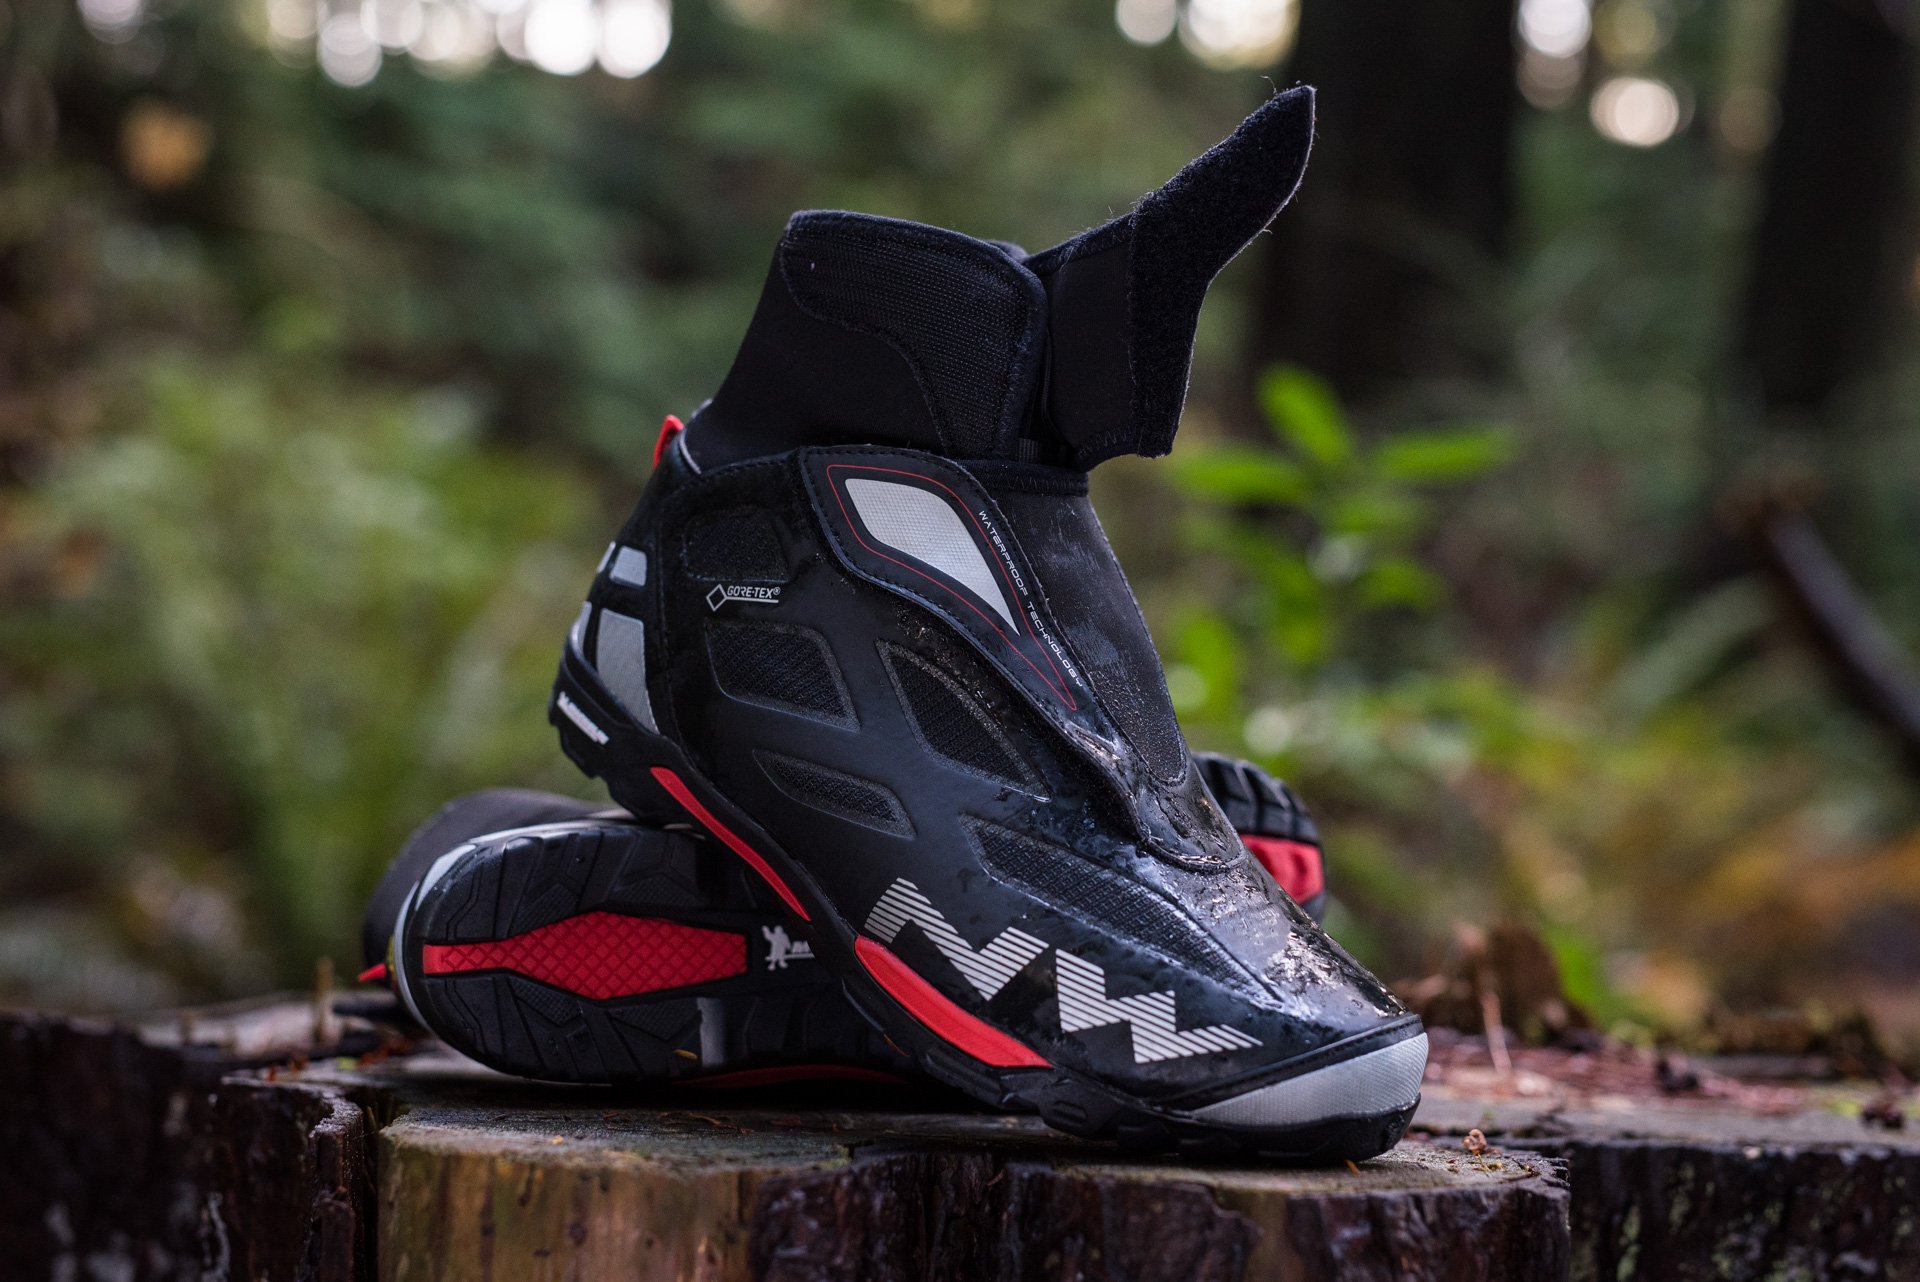 Northwave X-Arctic GTX winter shoes: Reviewed